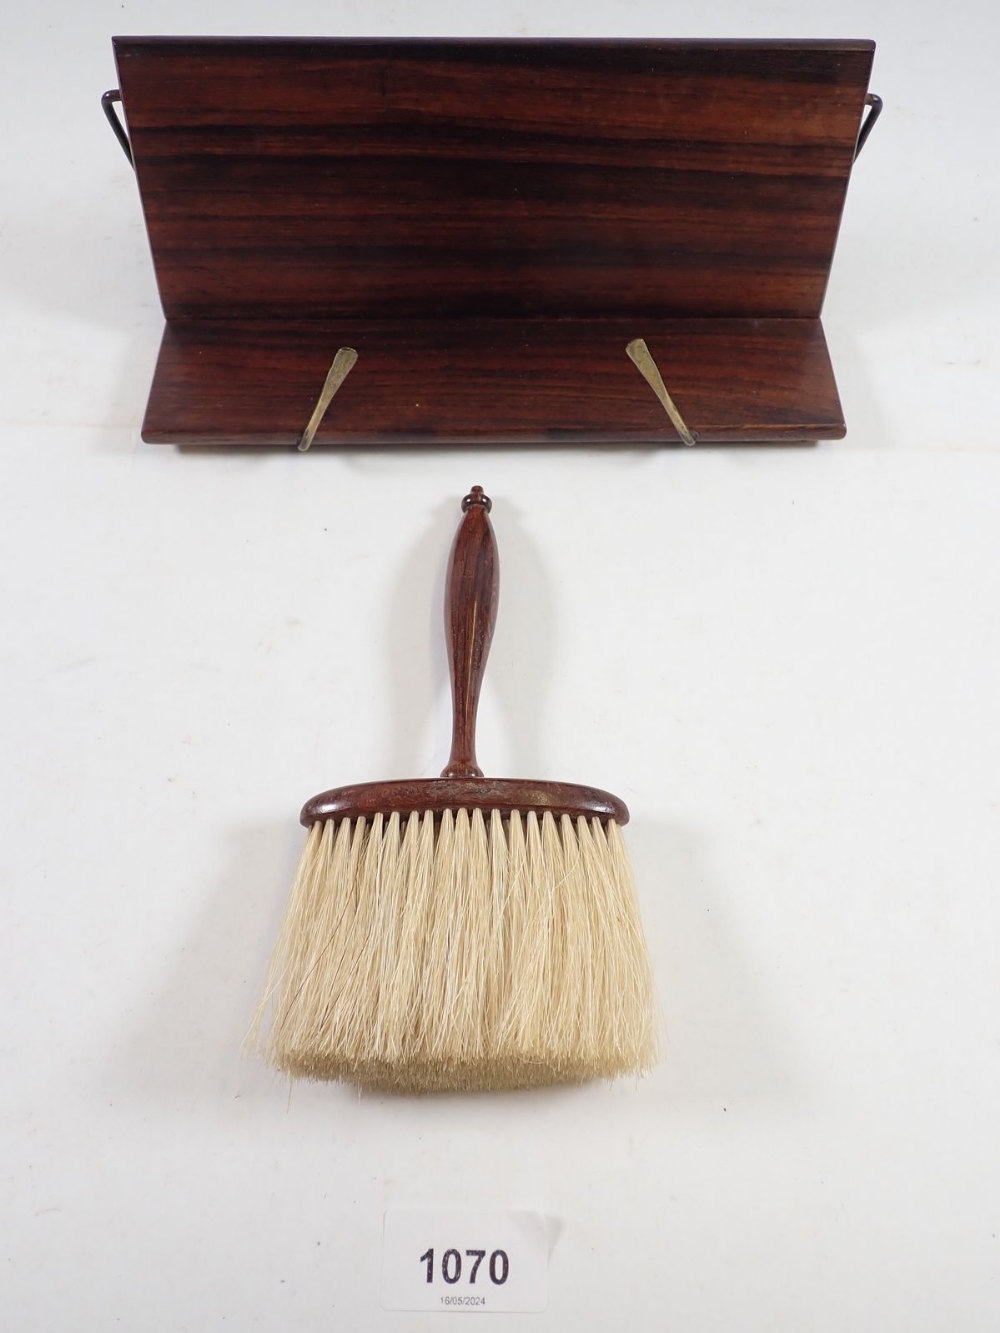 A rosewood bookrest and a rosewood hat brush